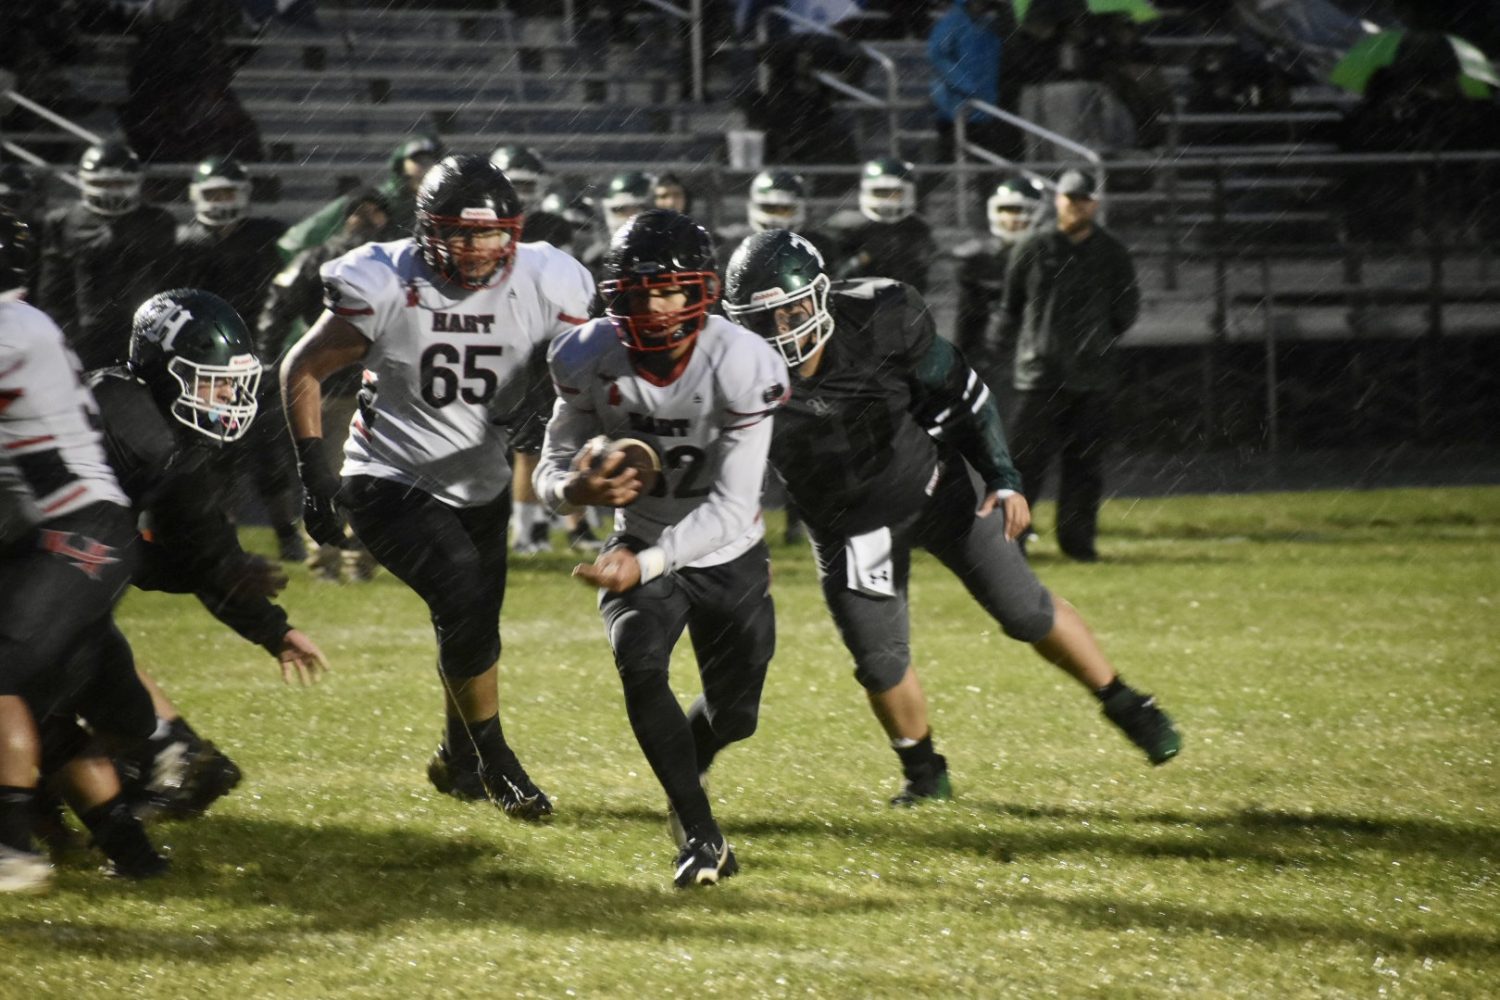 Hart on verge of football victory record after blanking Hesperia, 54-0